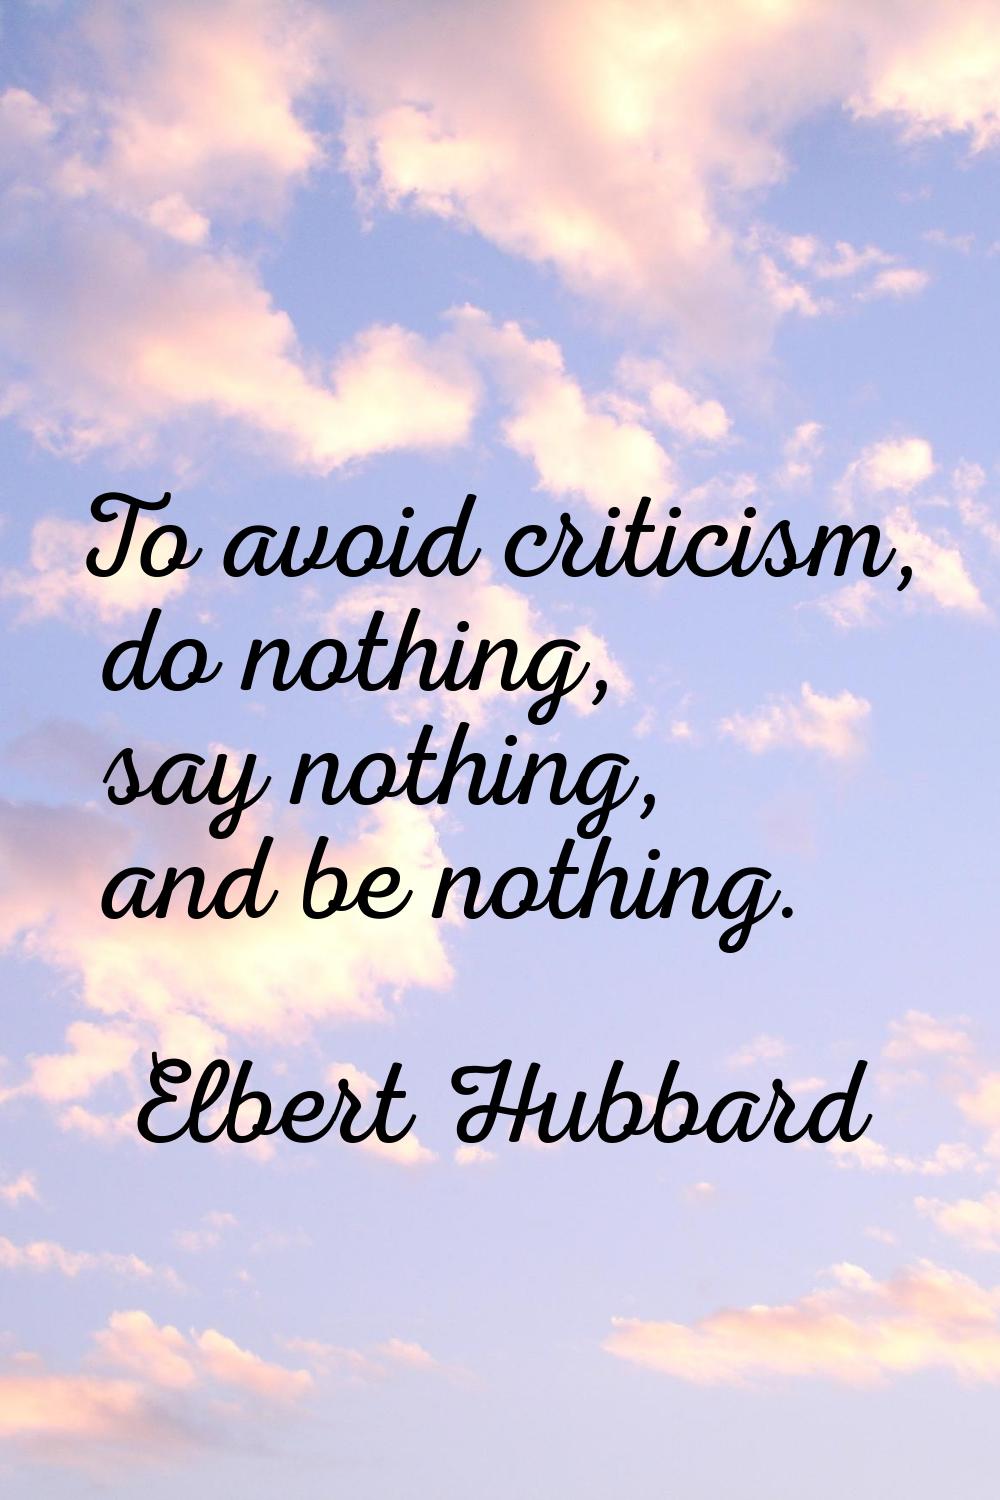 To avoid criticism, do nothing, say nothing, and be nothing.